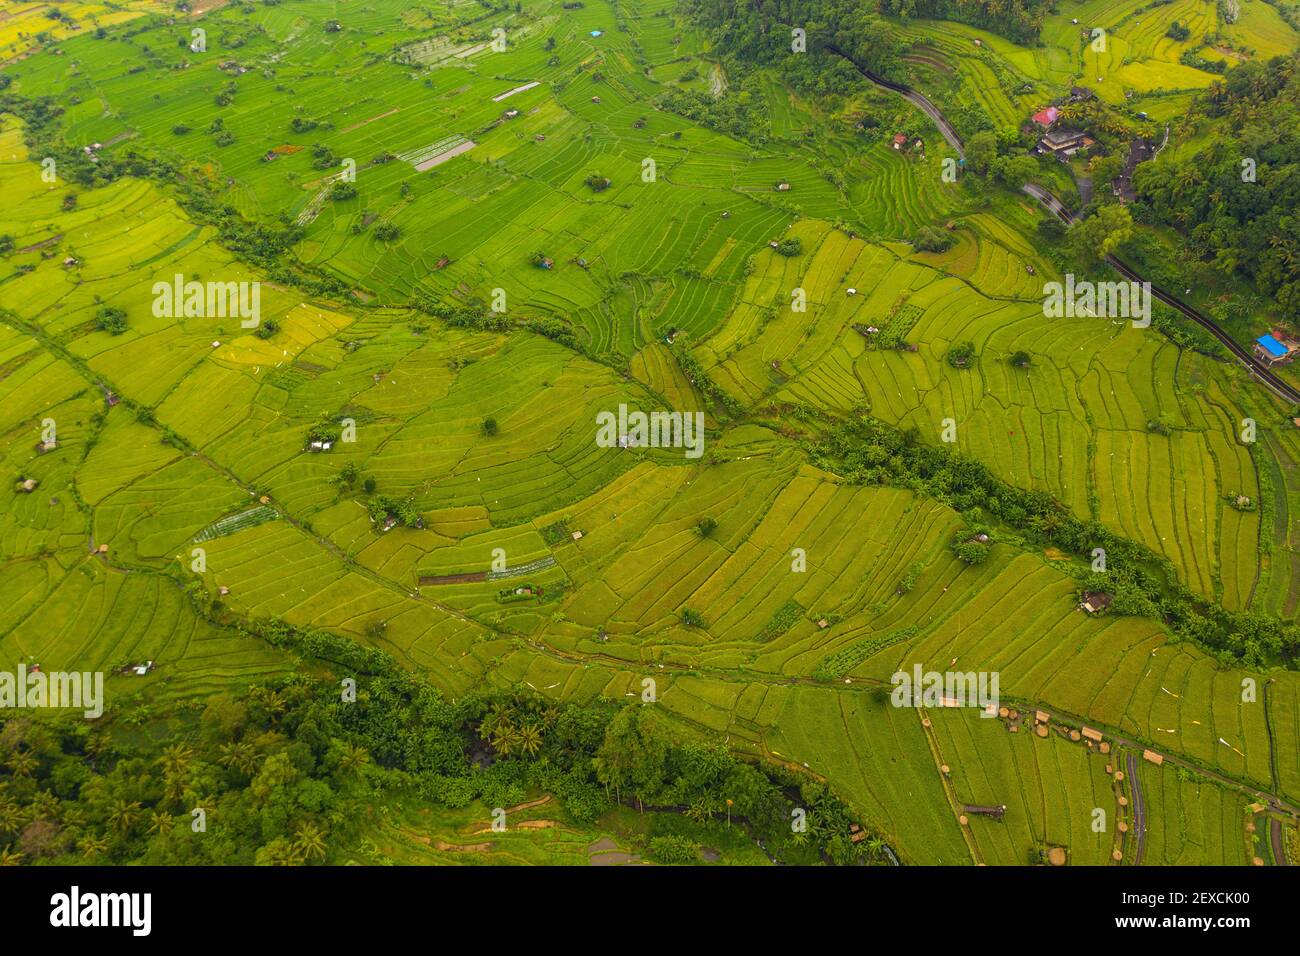 Terraced rice fields with small rural farms in Bali, Indonesia Top down overhead aerial birds eye view of lush green paddy field plantations on the hill Stock Photo